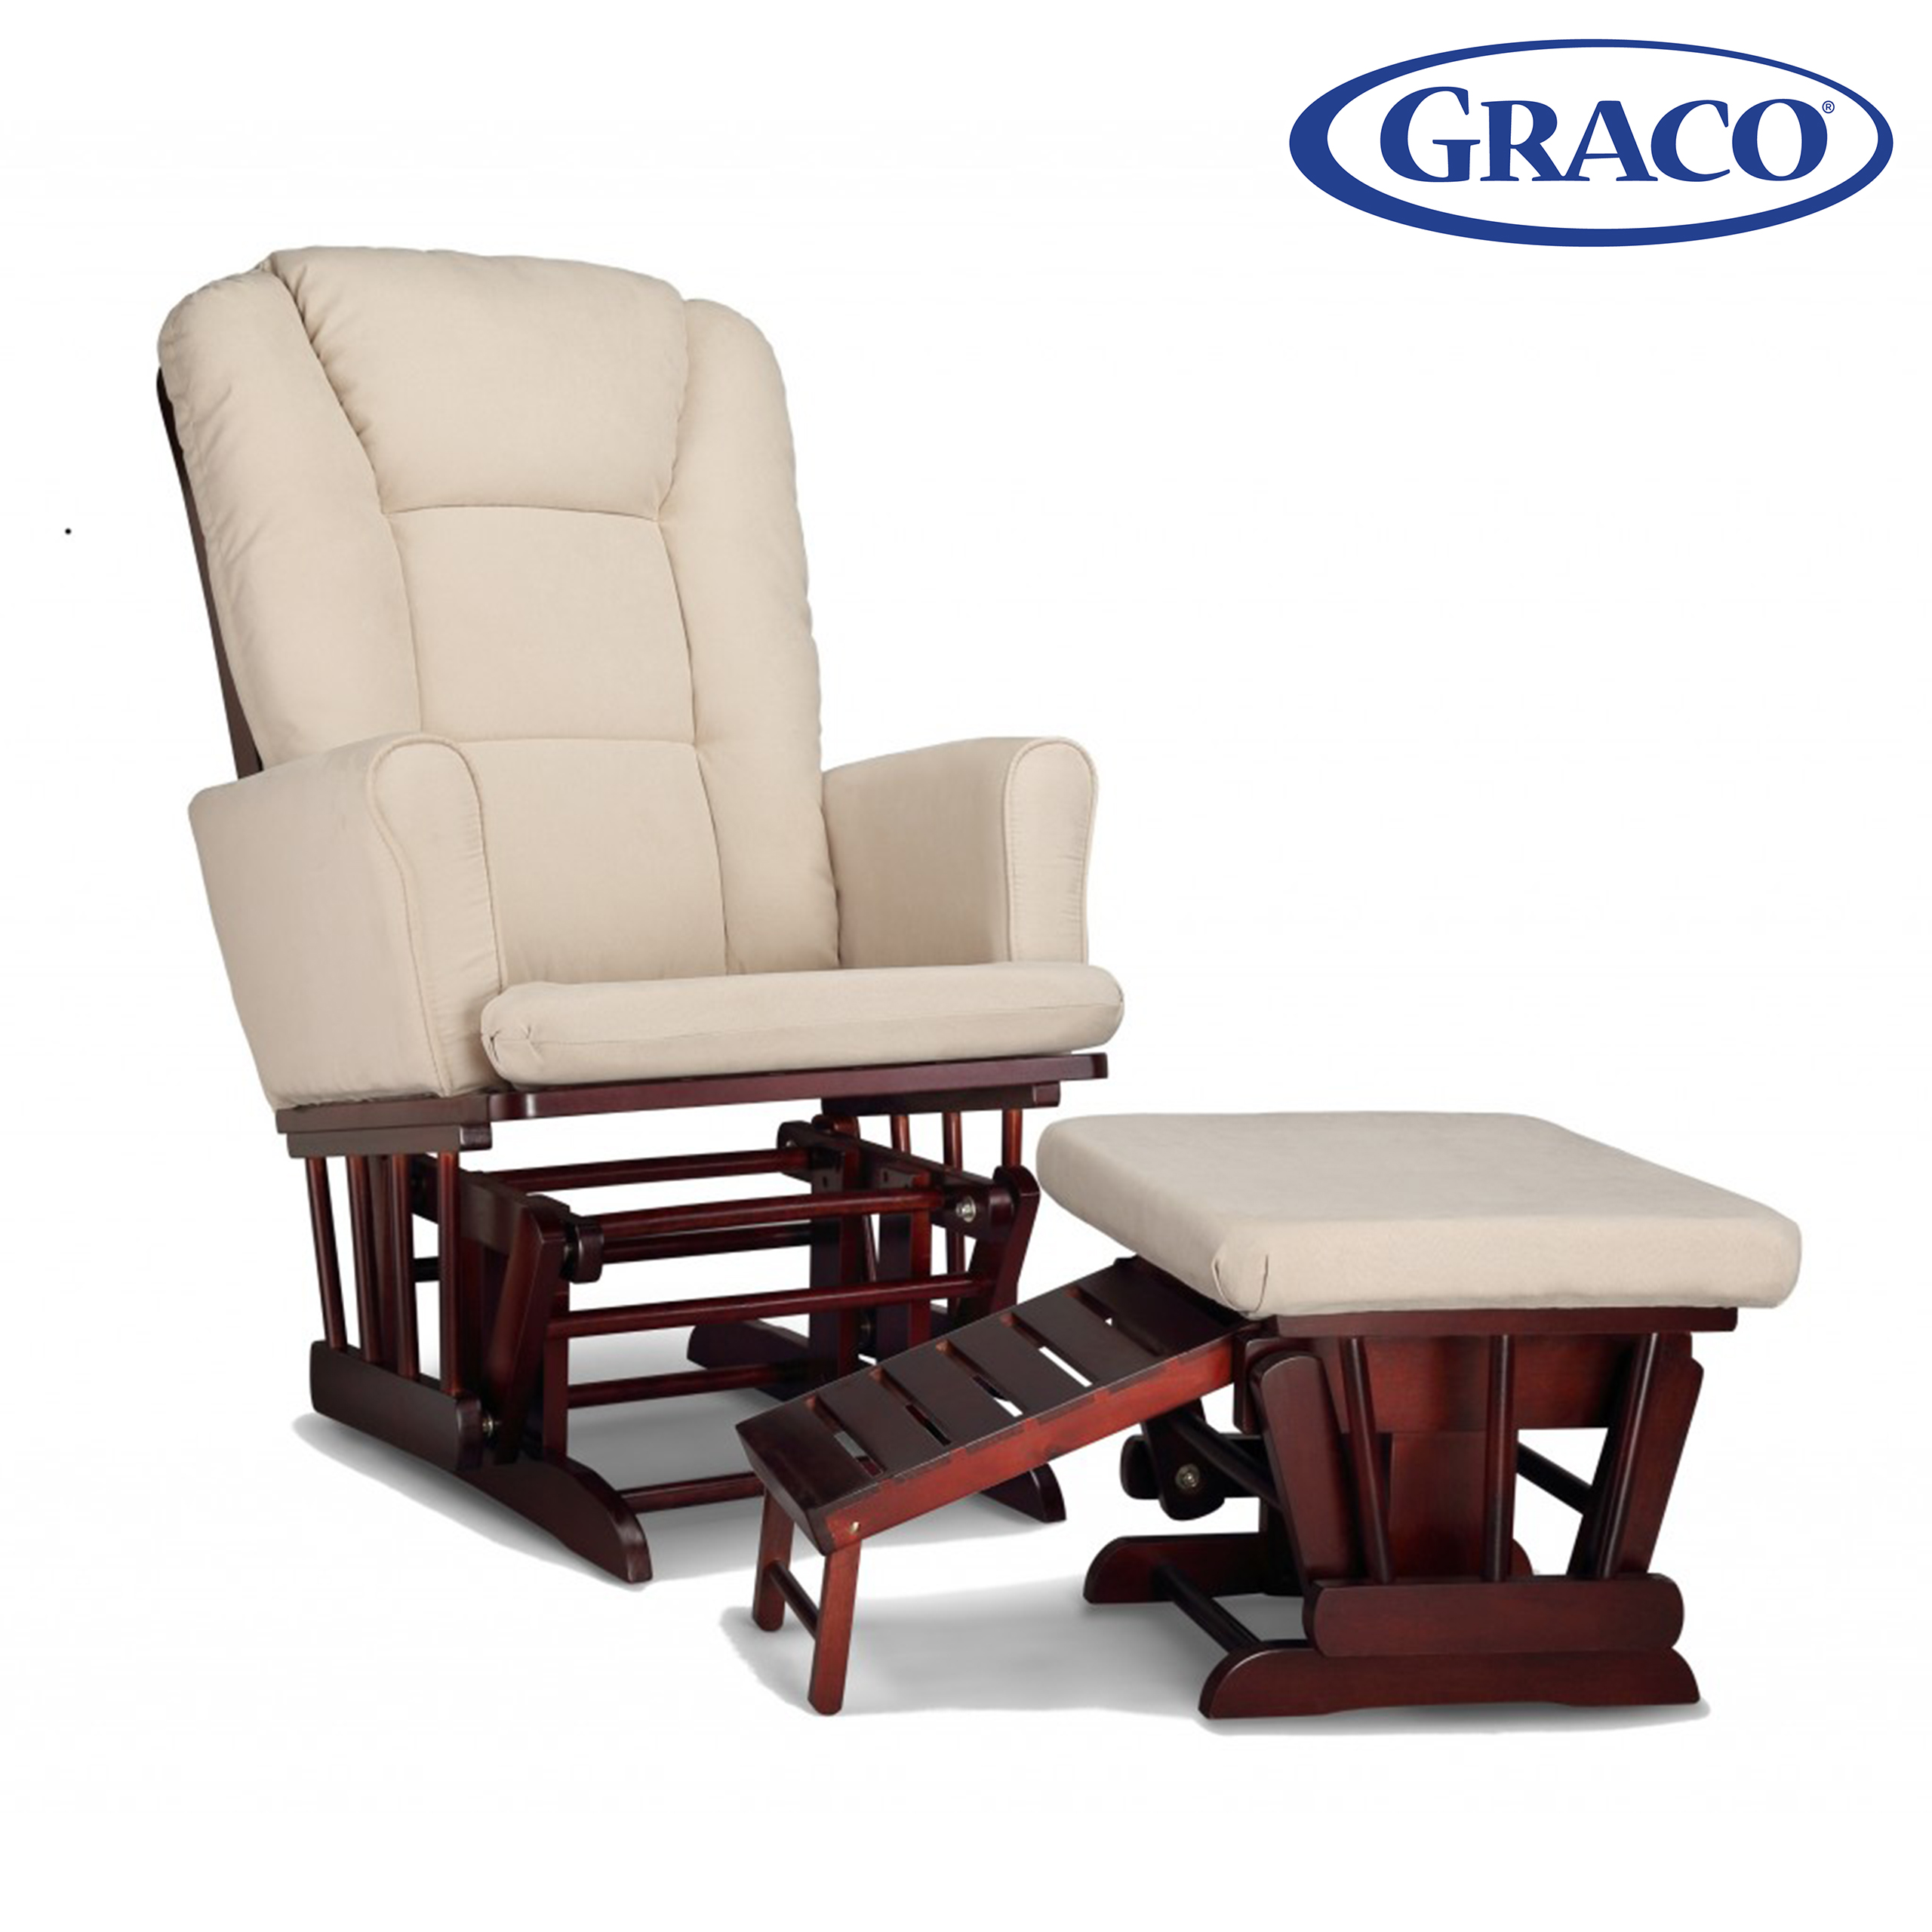 Graco Sterling Semi-Upholstered Glider and Nursing Ottoman Cherry with Beige Cushions - image 1 of 4